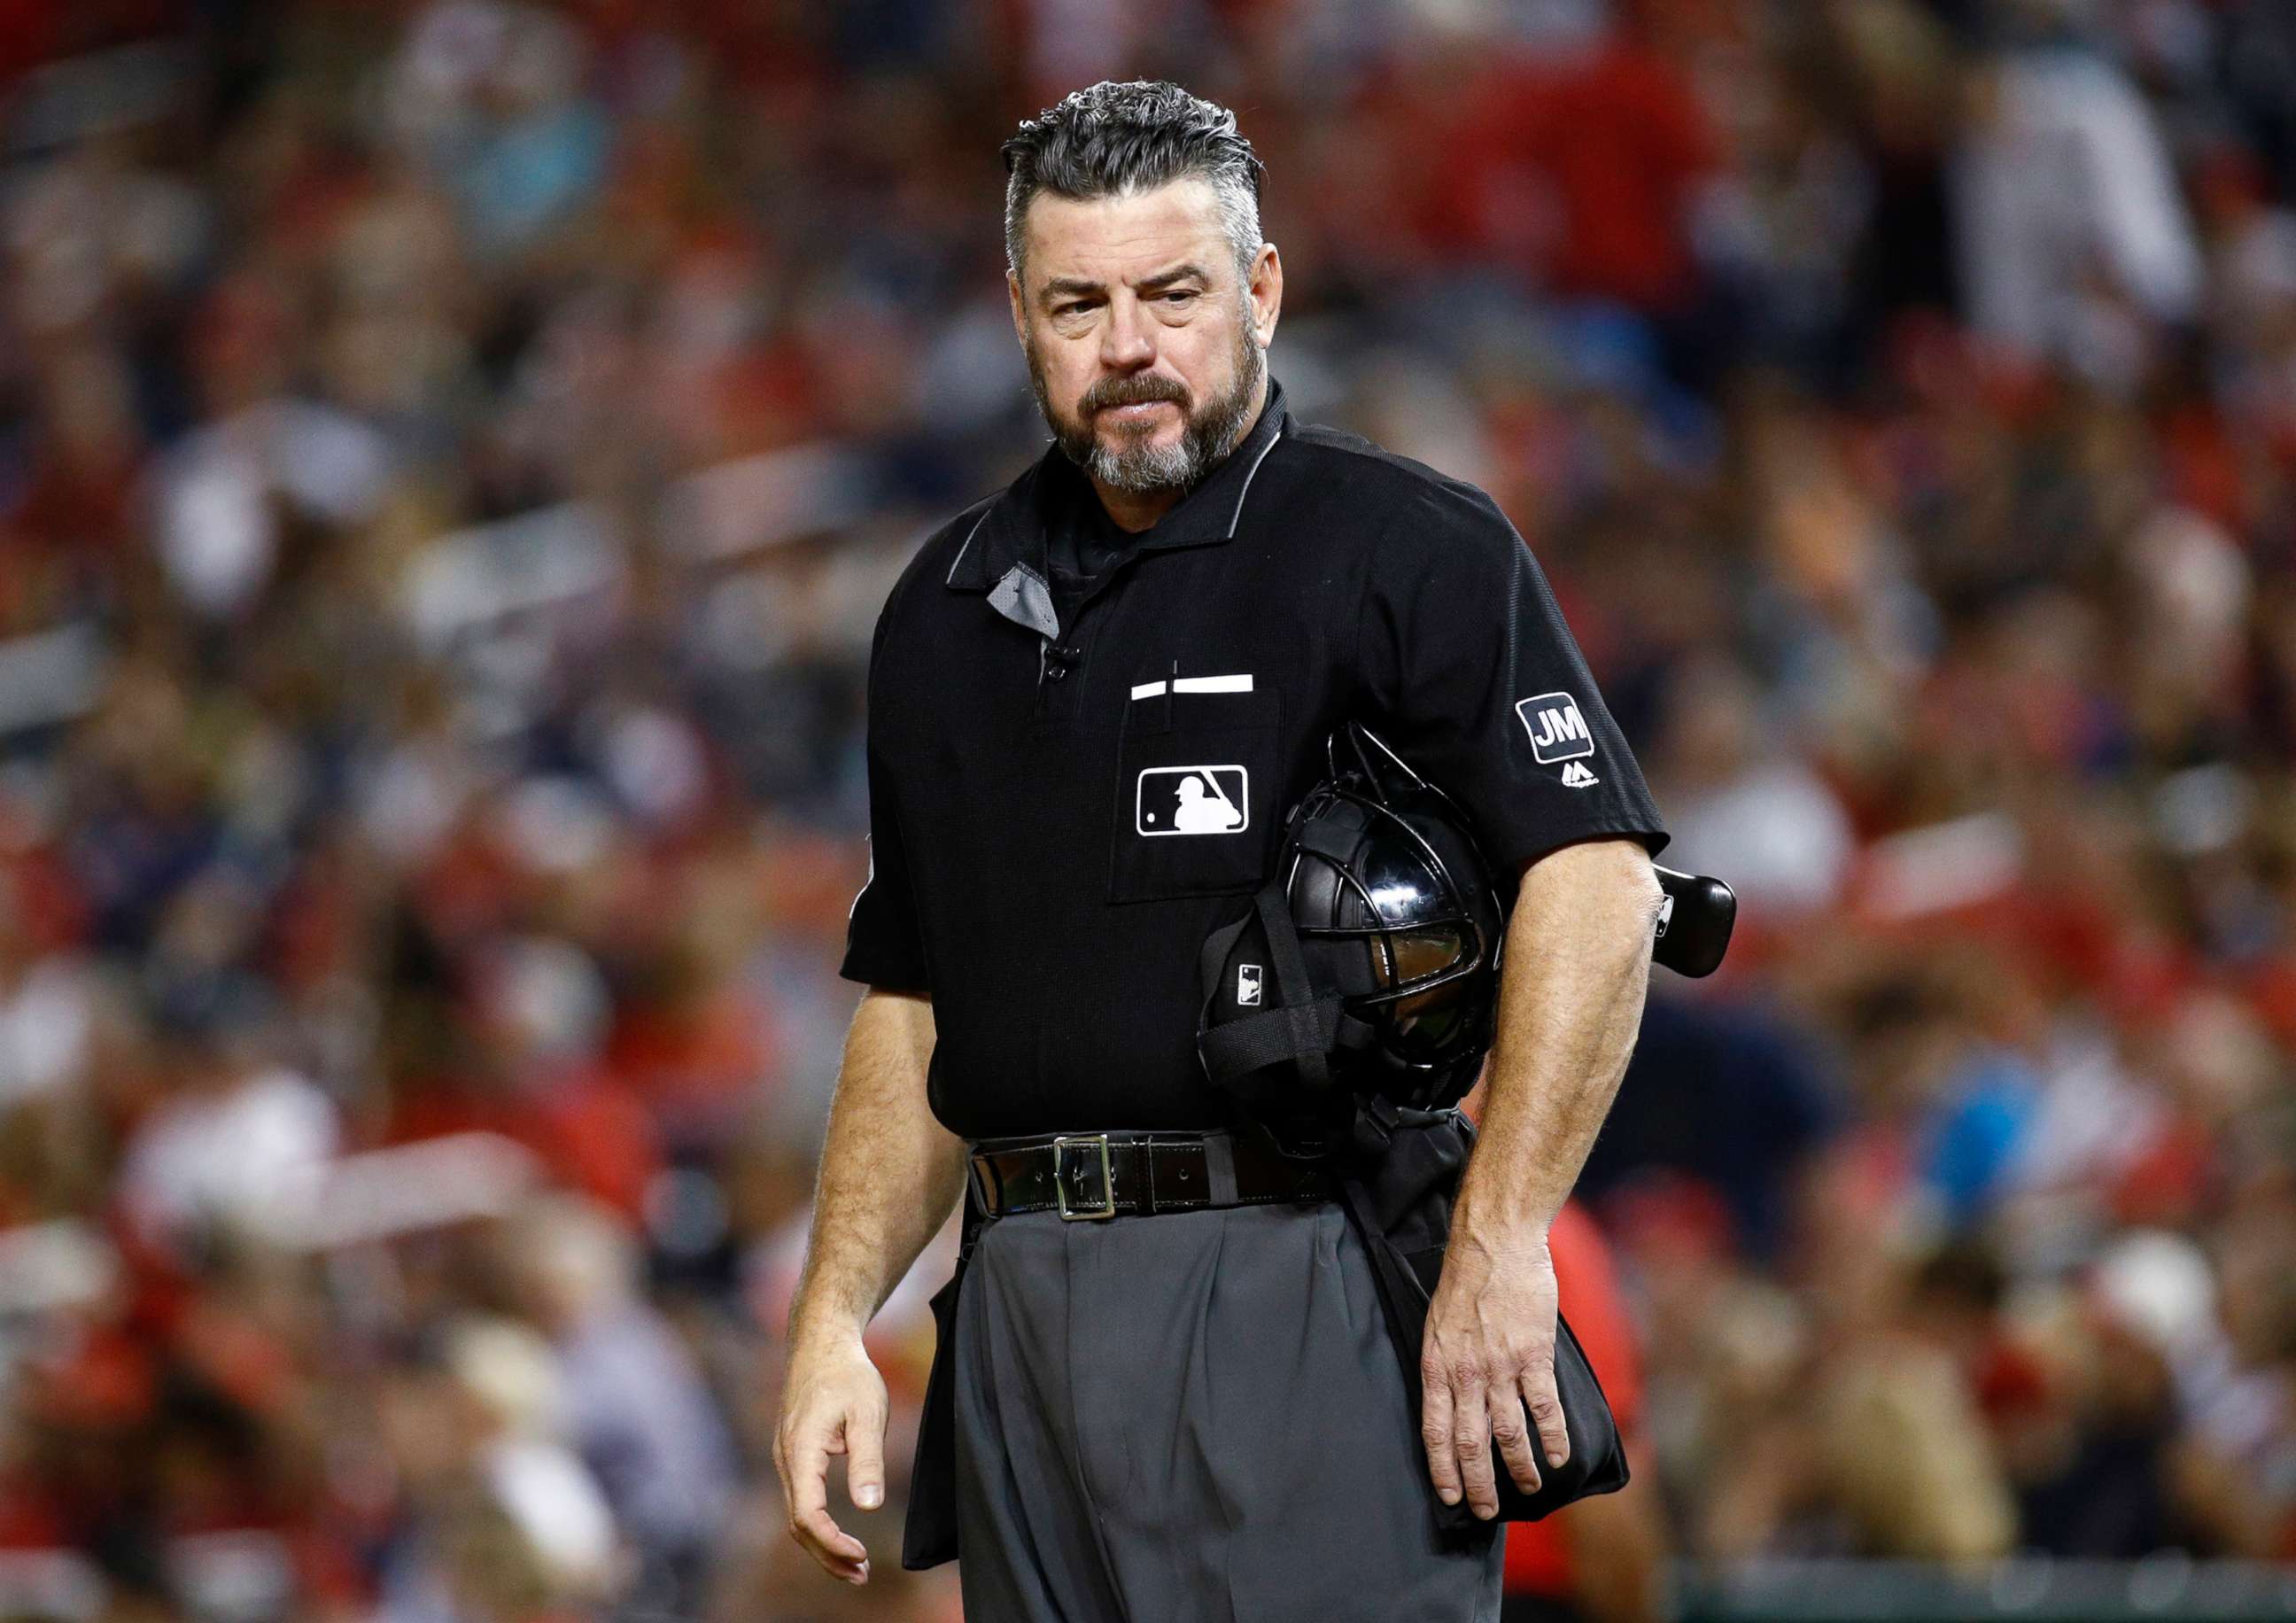 PHOTO: Umpire Rob Drake stands on the field during a baseball game between the Atlanta Braves and the Washington Nationals in Washington,Sept. 13, 2019.